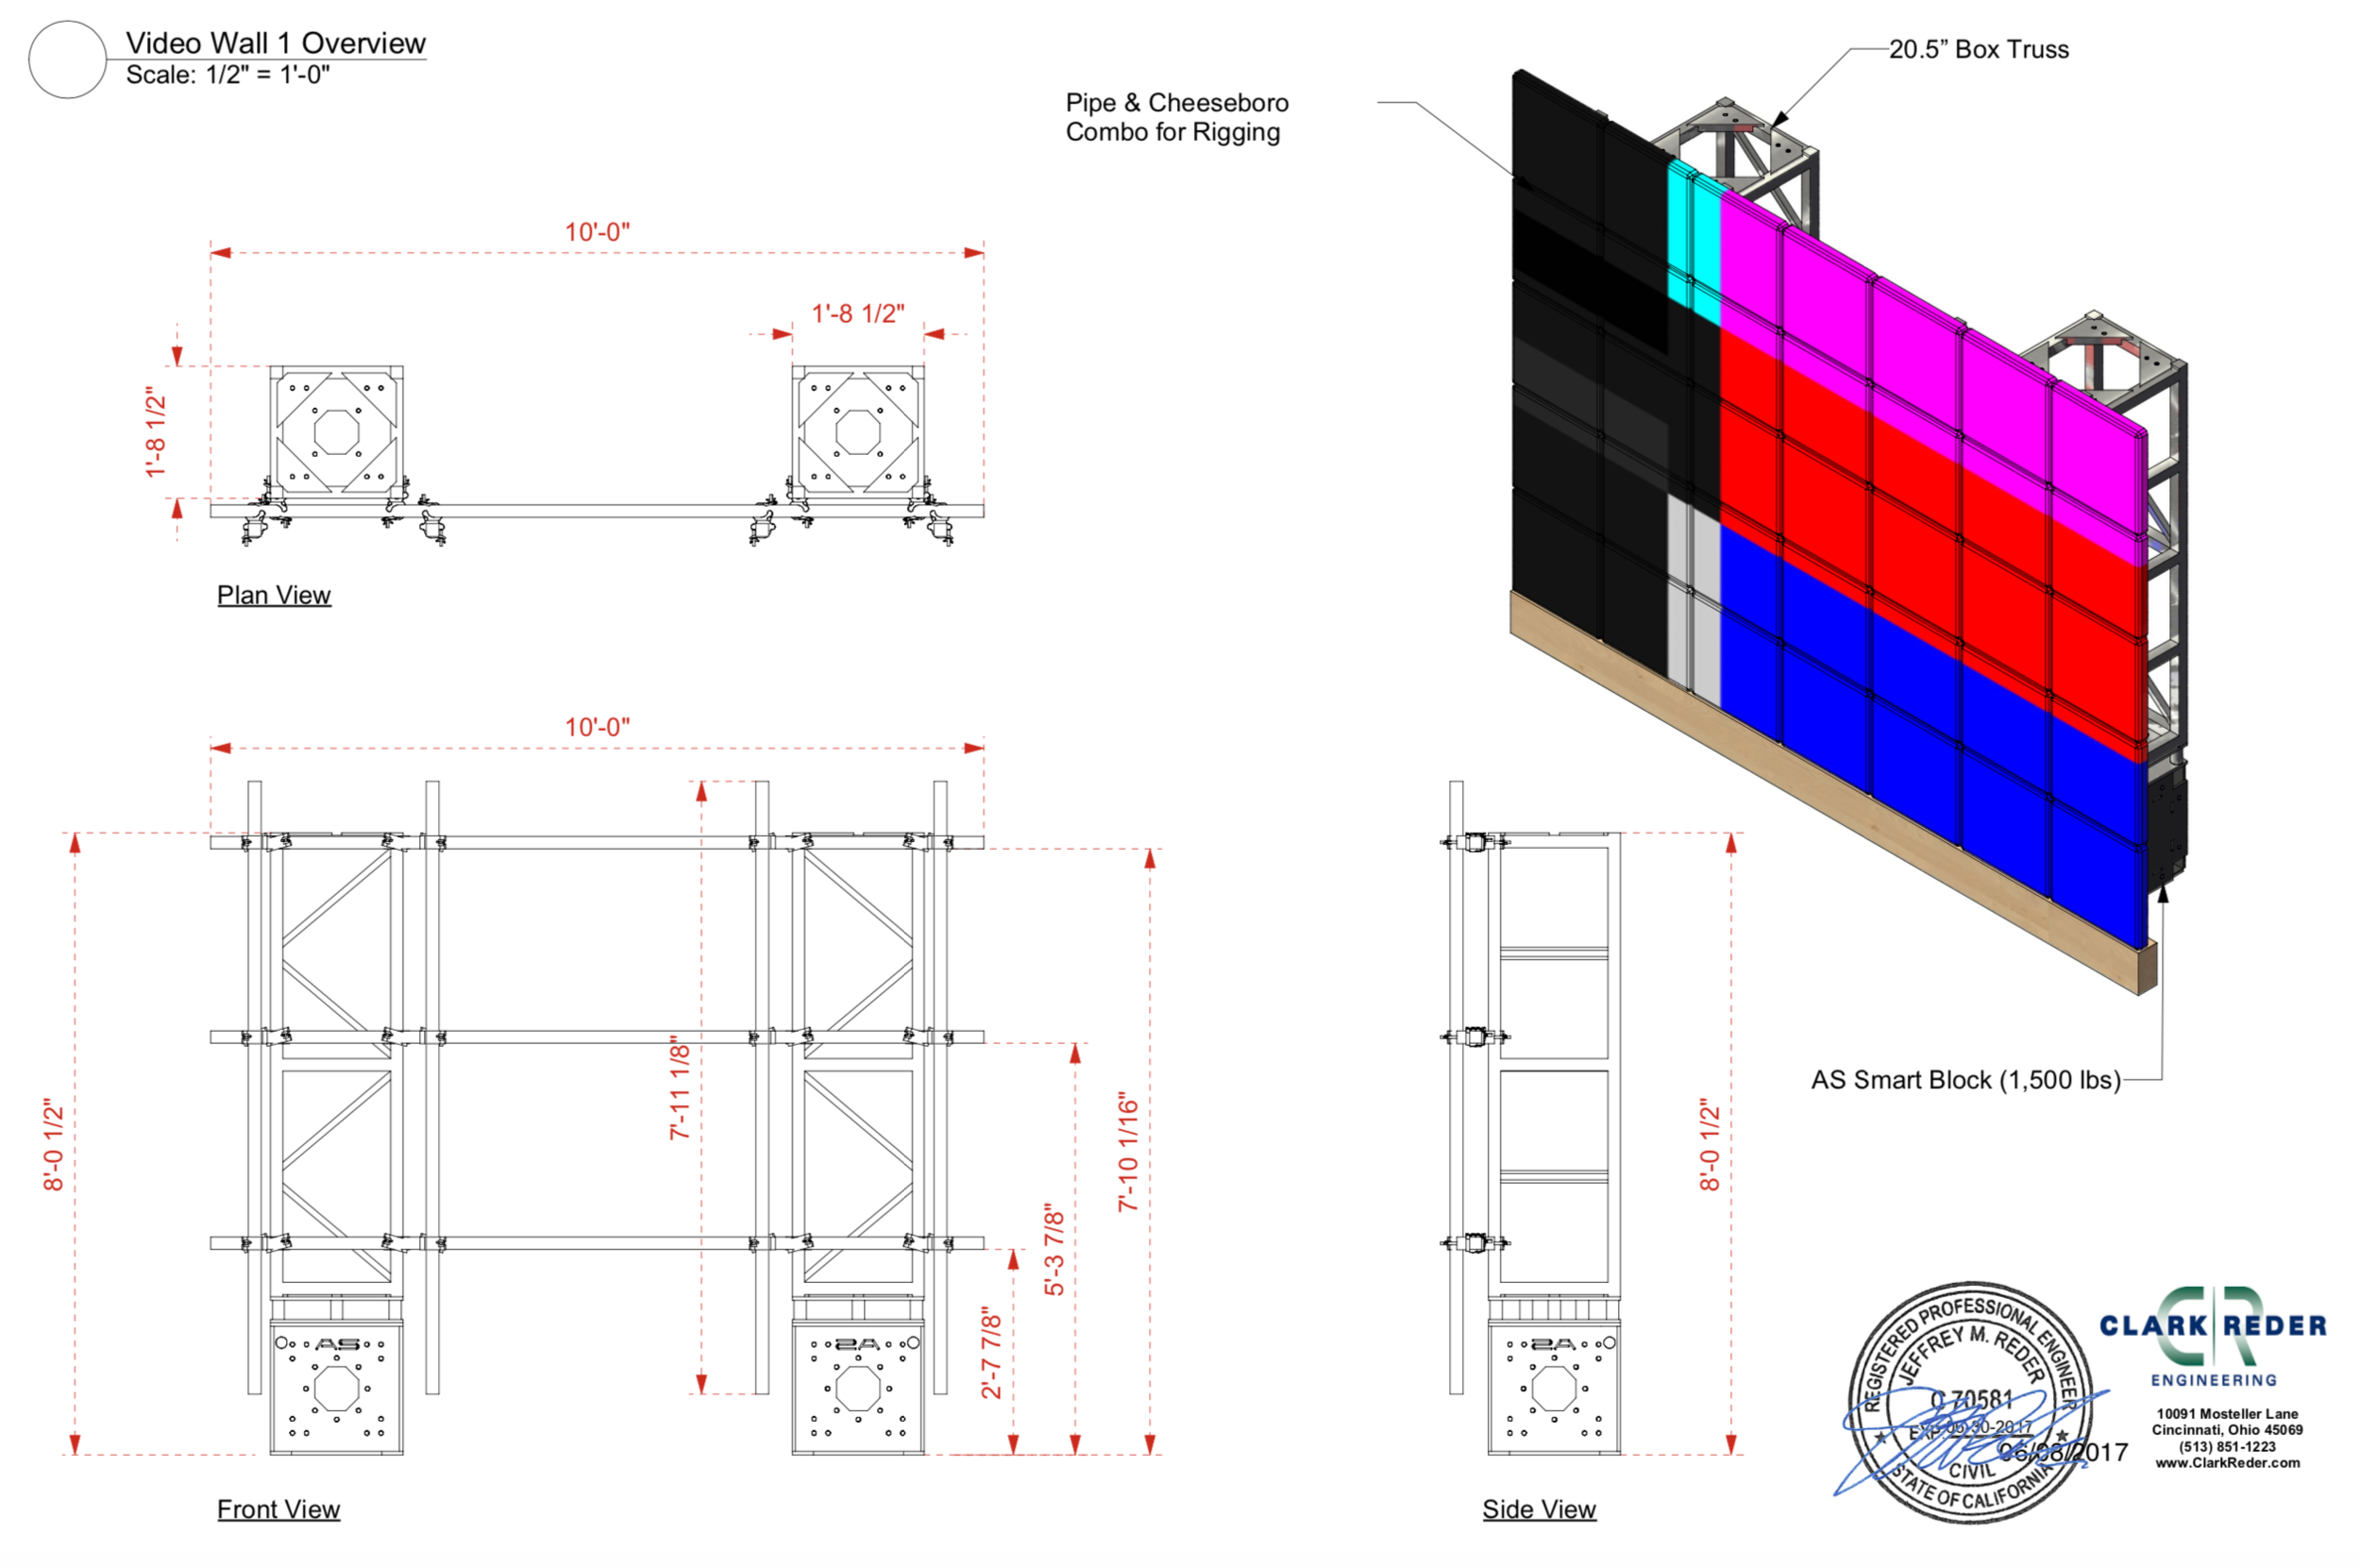 TECHNICAL DRAWING | Video Wall Rigging Plan